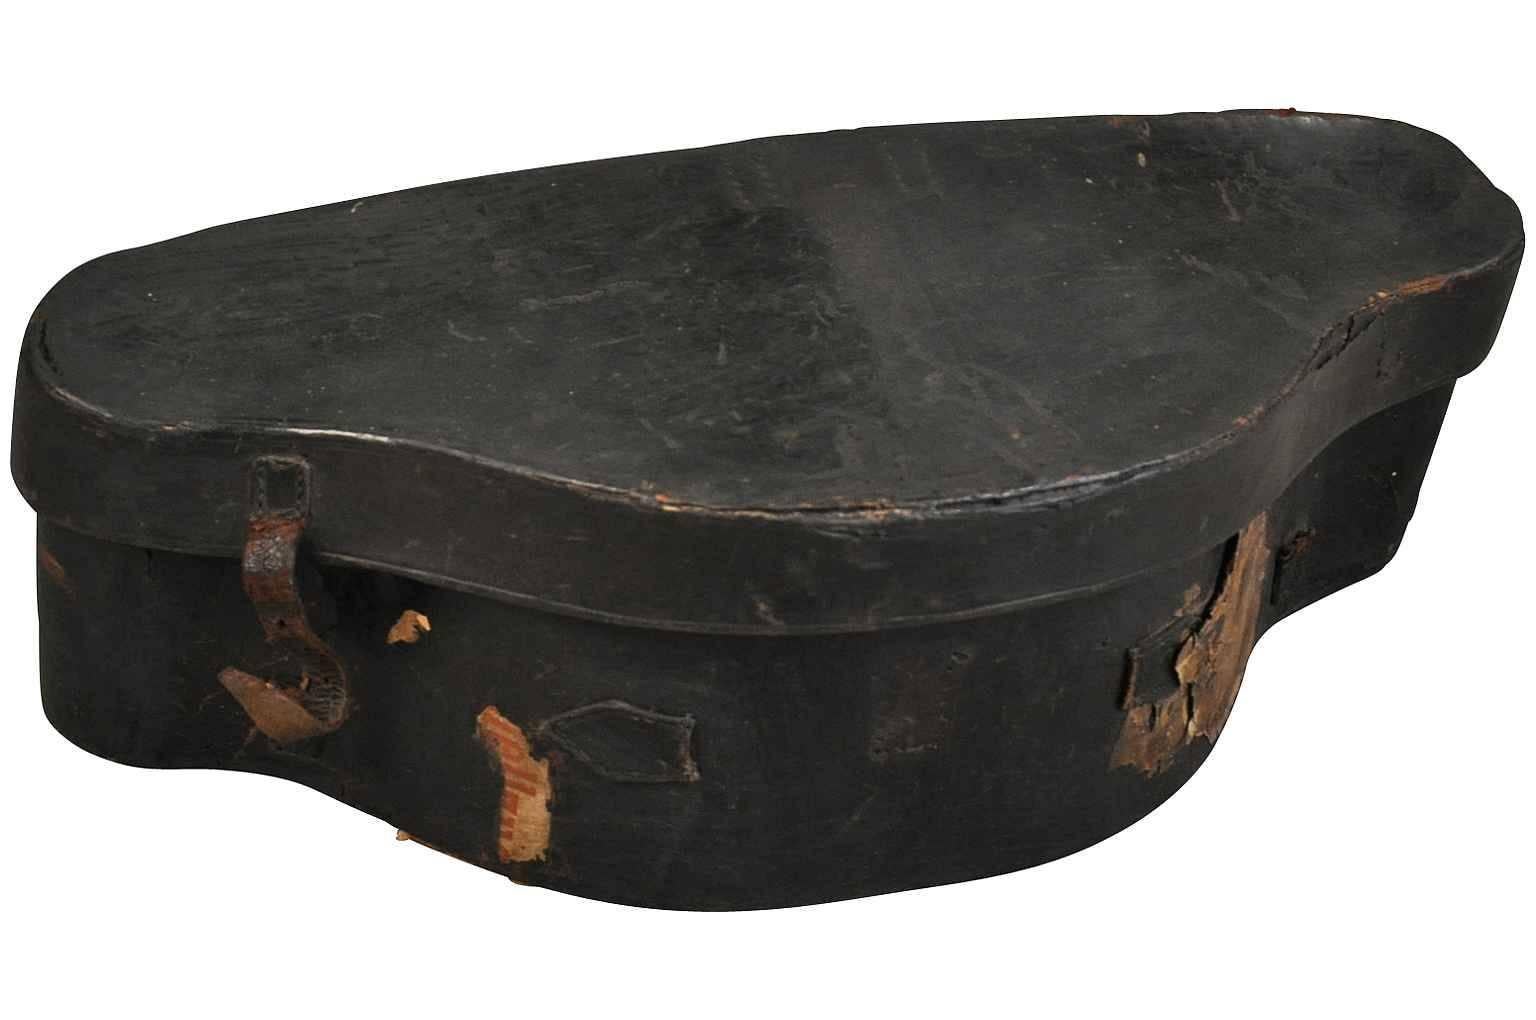 A sensational early 19th century French Chapeau De Gendarme - officer's hat box in leather. Such a nostalgic shape!! A great accent piece for any bookcase or tabletop.